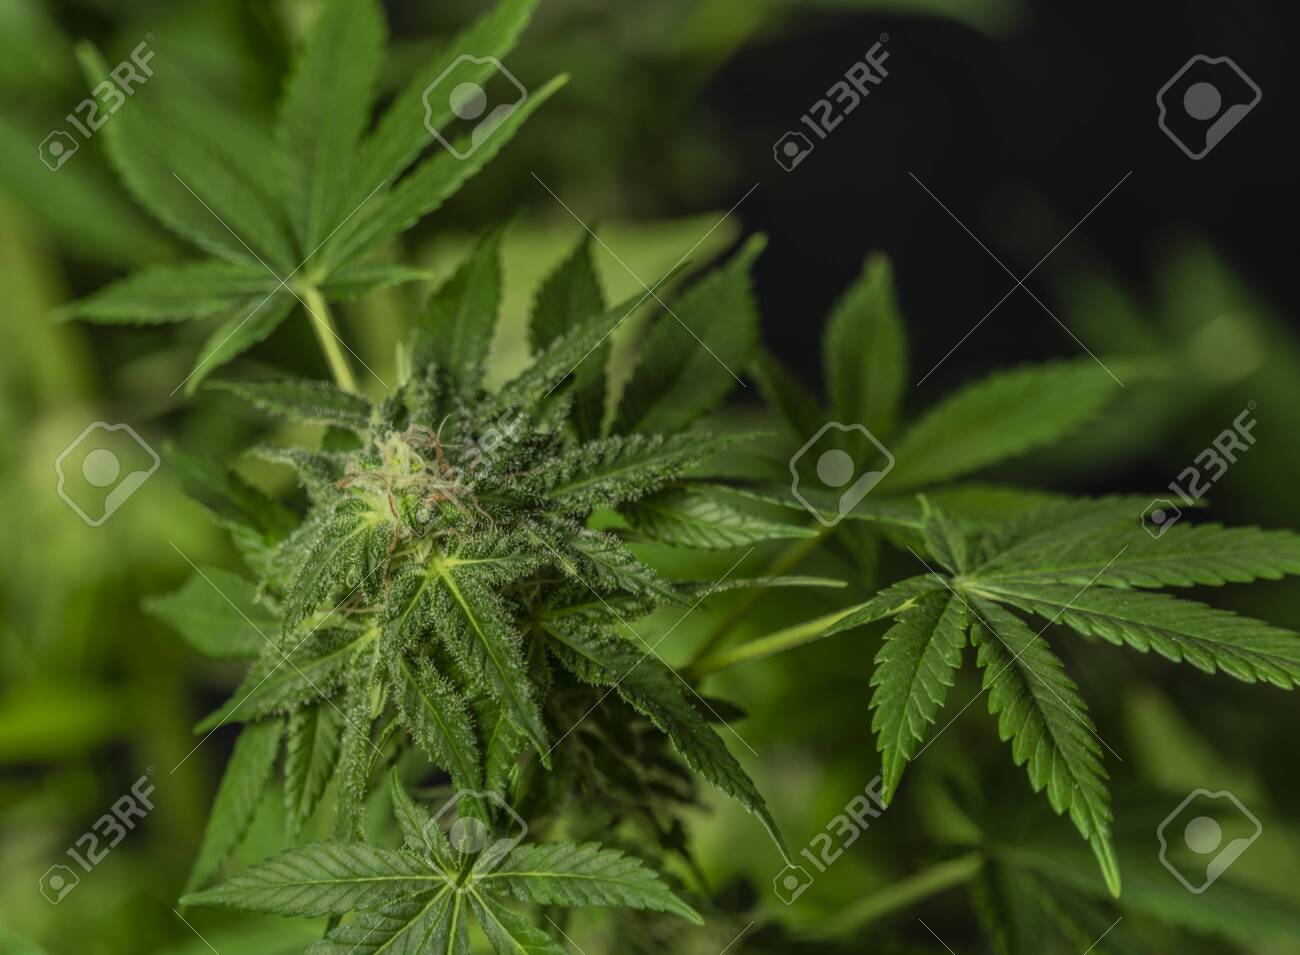 Aged Afghan Kush Special Variety Of Marijuana Flower With Black